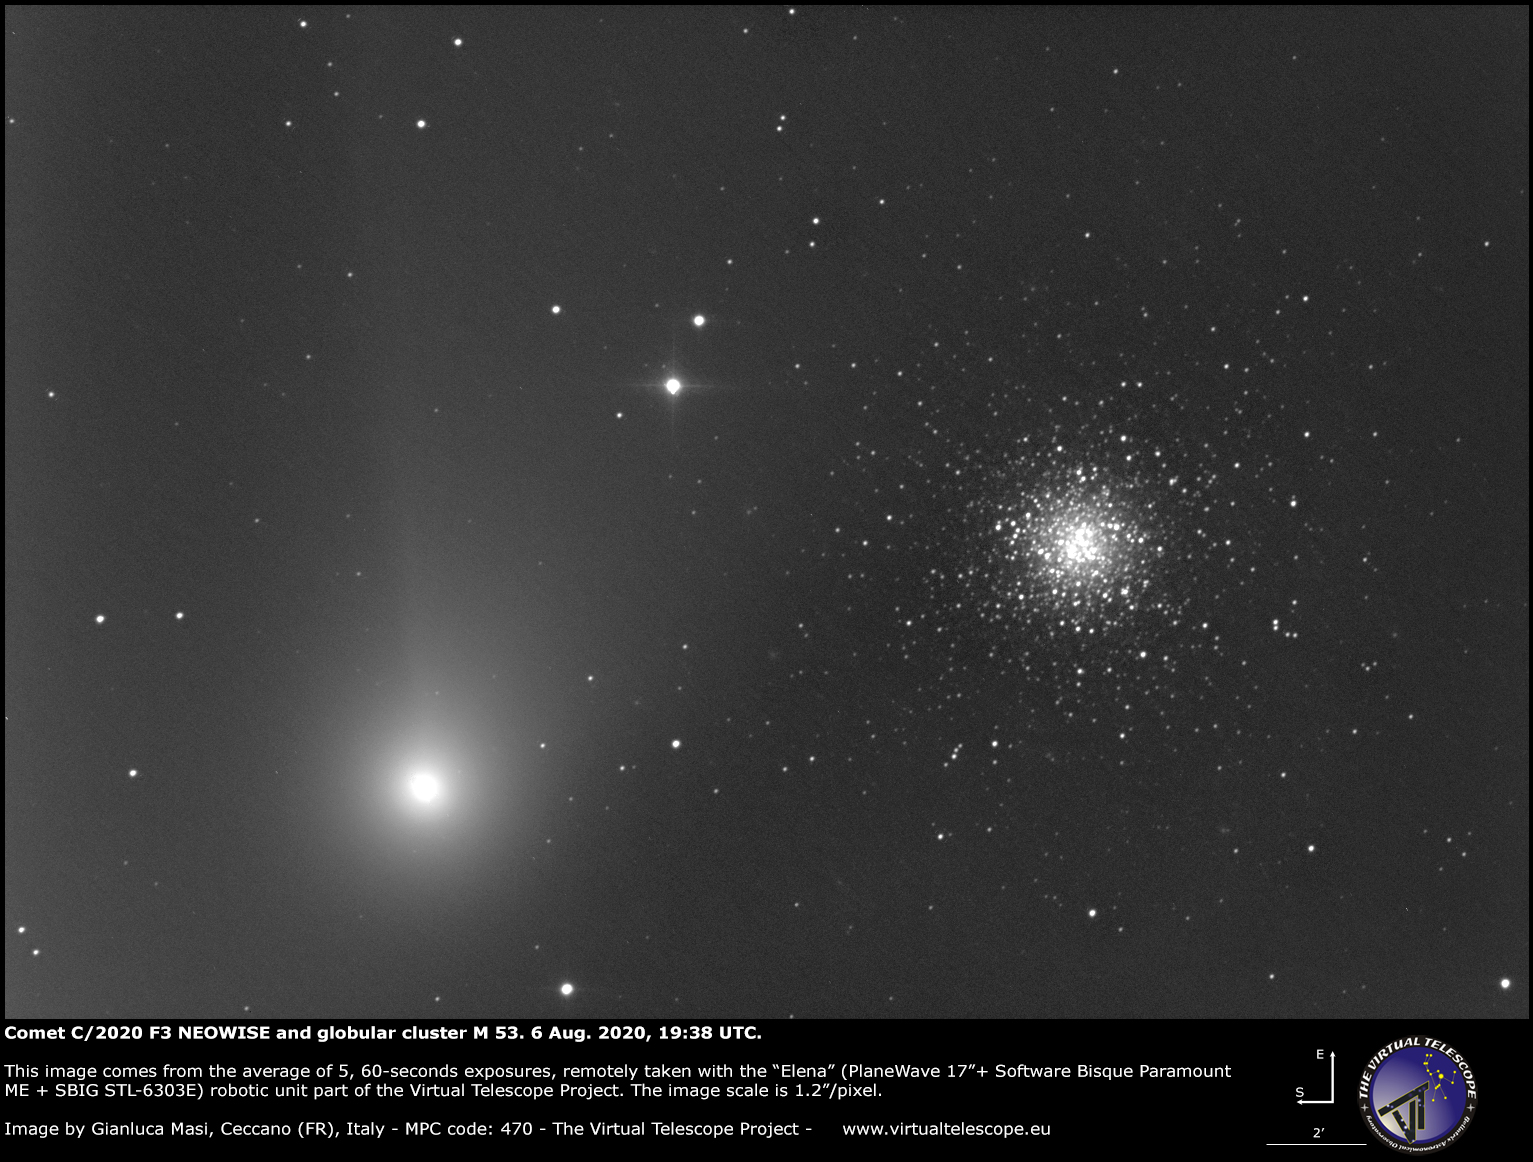 Comet C/2020 F3 NEOWISE and globular cluster Messier 53. 6 Aug. 2020.